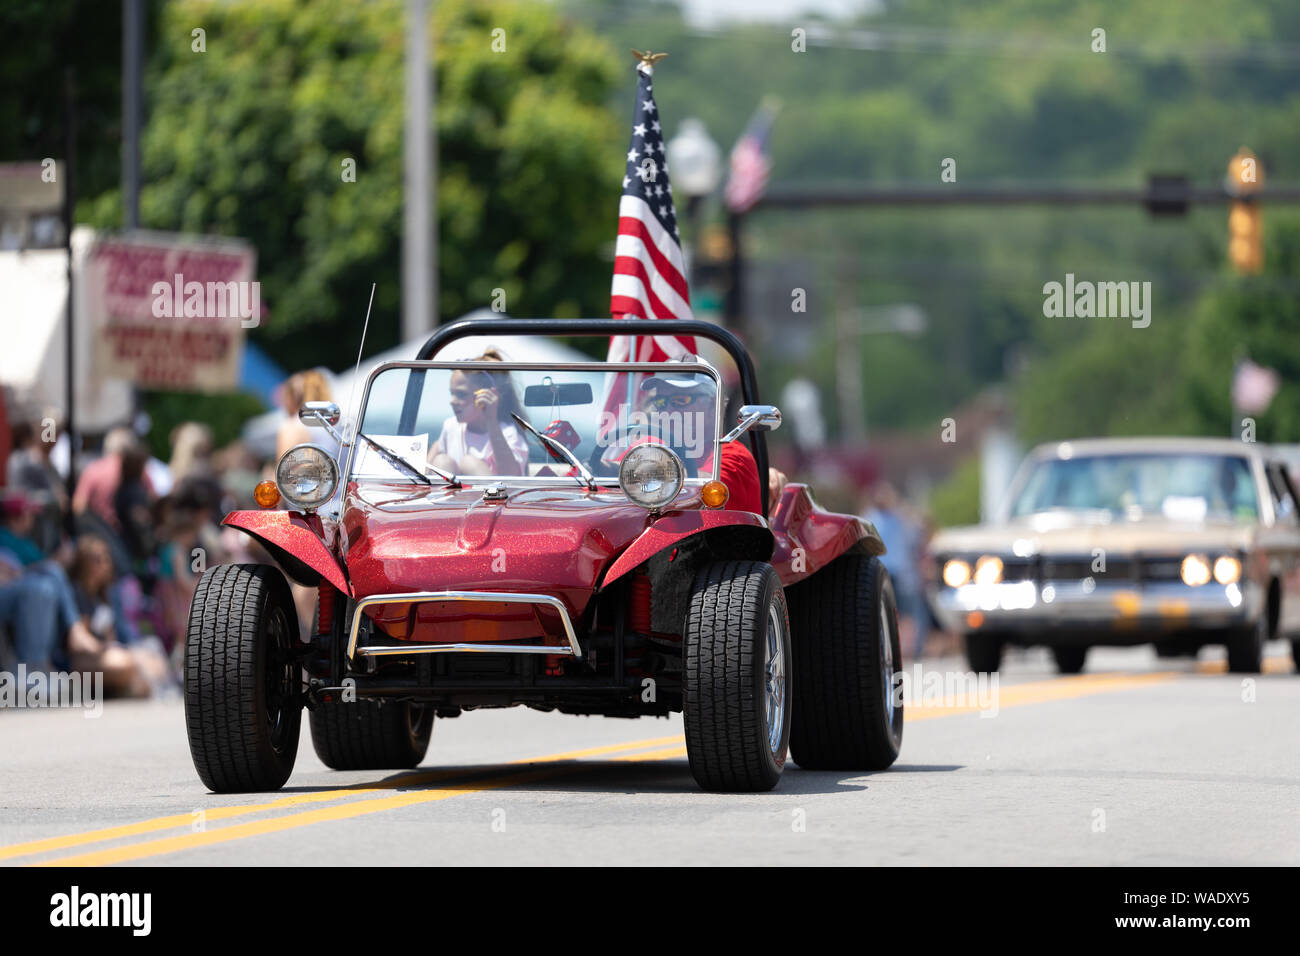 Buggie High Resolution Stock Photography And Images Alamy